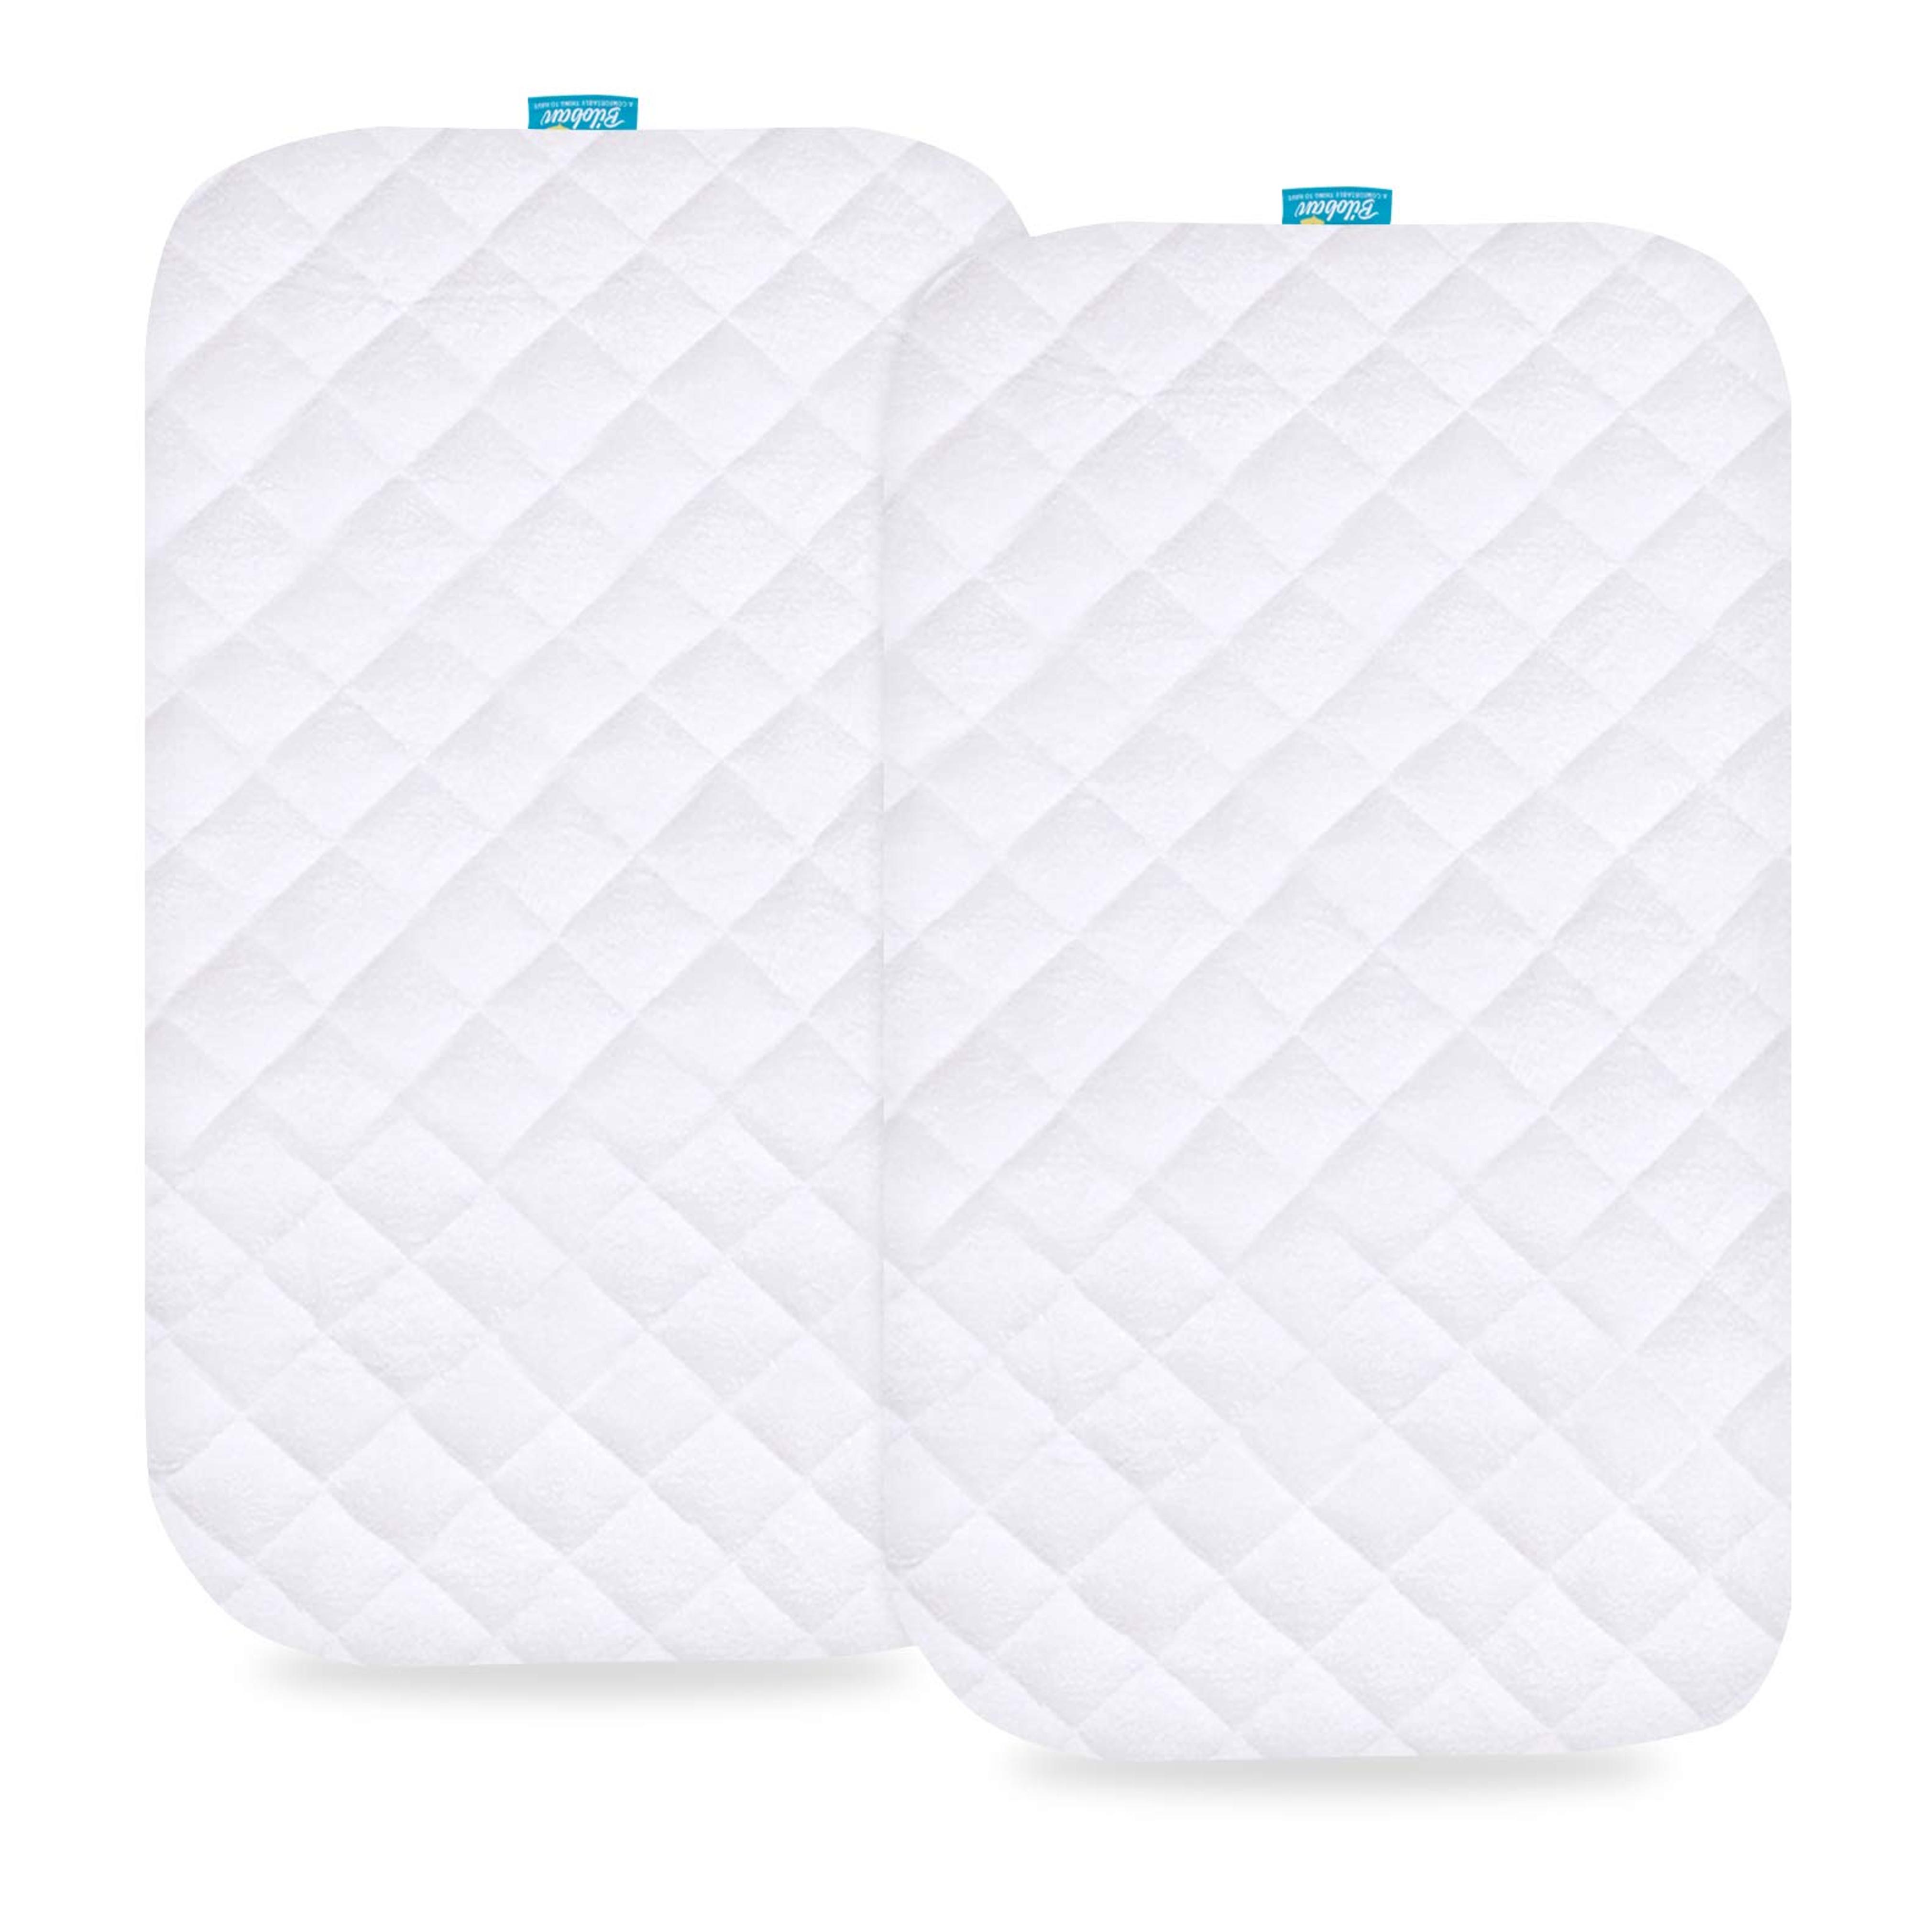 Amazon.com: Bassinet Mattress Pad Cover Compatible with Mika Micky Bedside Sleeper, 2 Pack, Waterproof Quilted Ultra Soft Bamboo Sleep Surface, Breathable and Easy Care : Baby